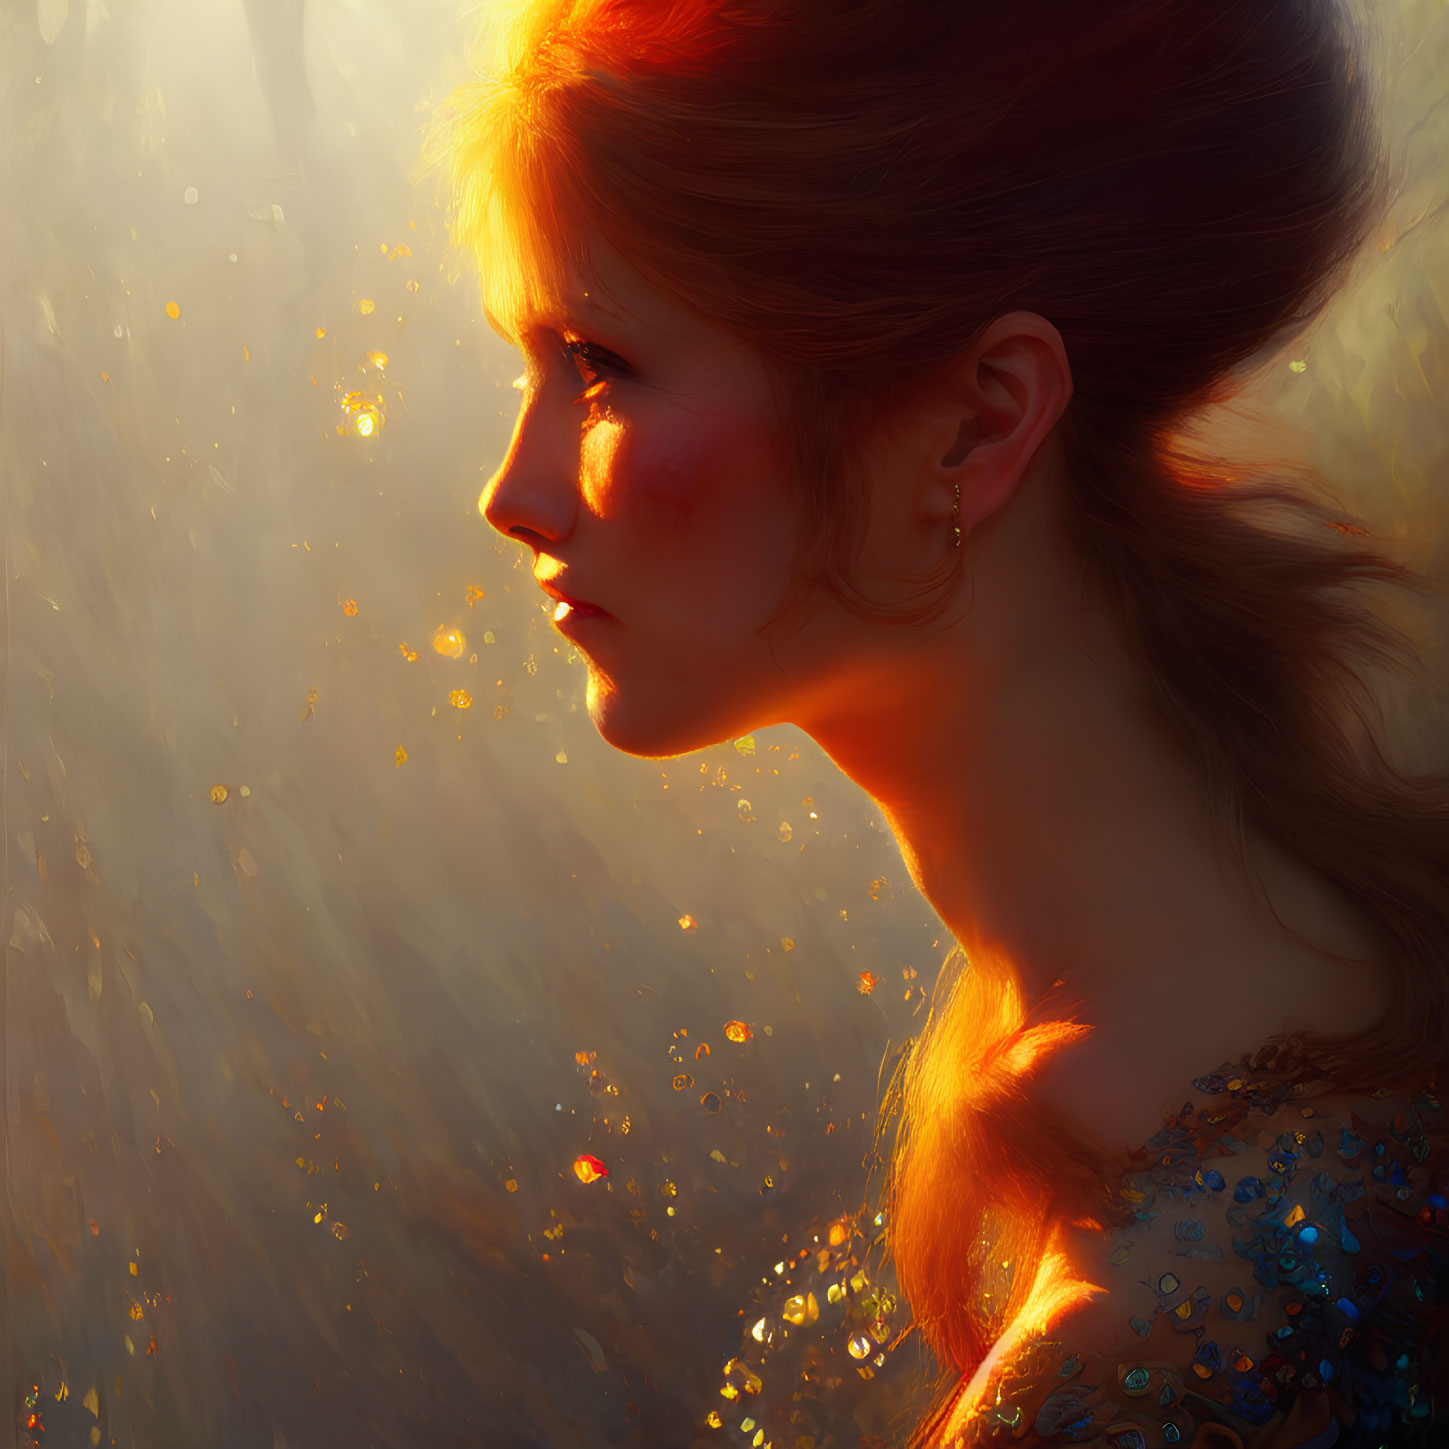 Red-Haired Woman in Sunlight with Golden Glitters and Sequins